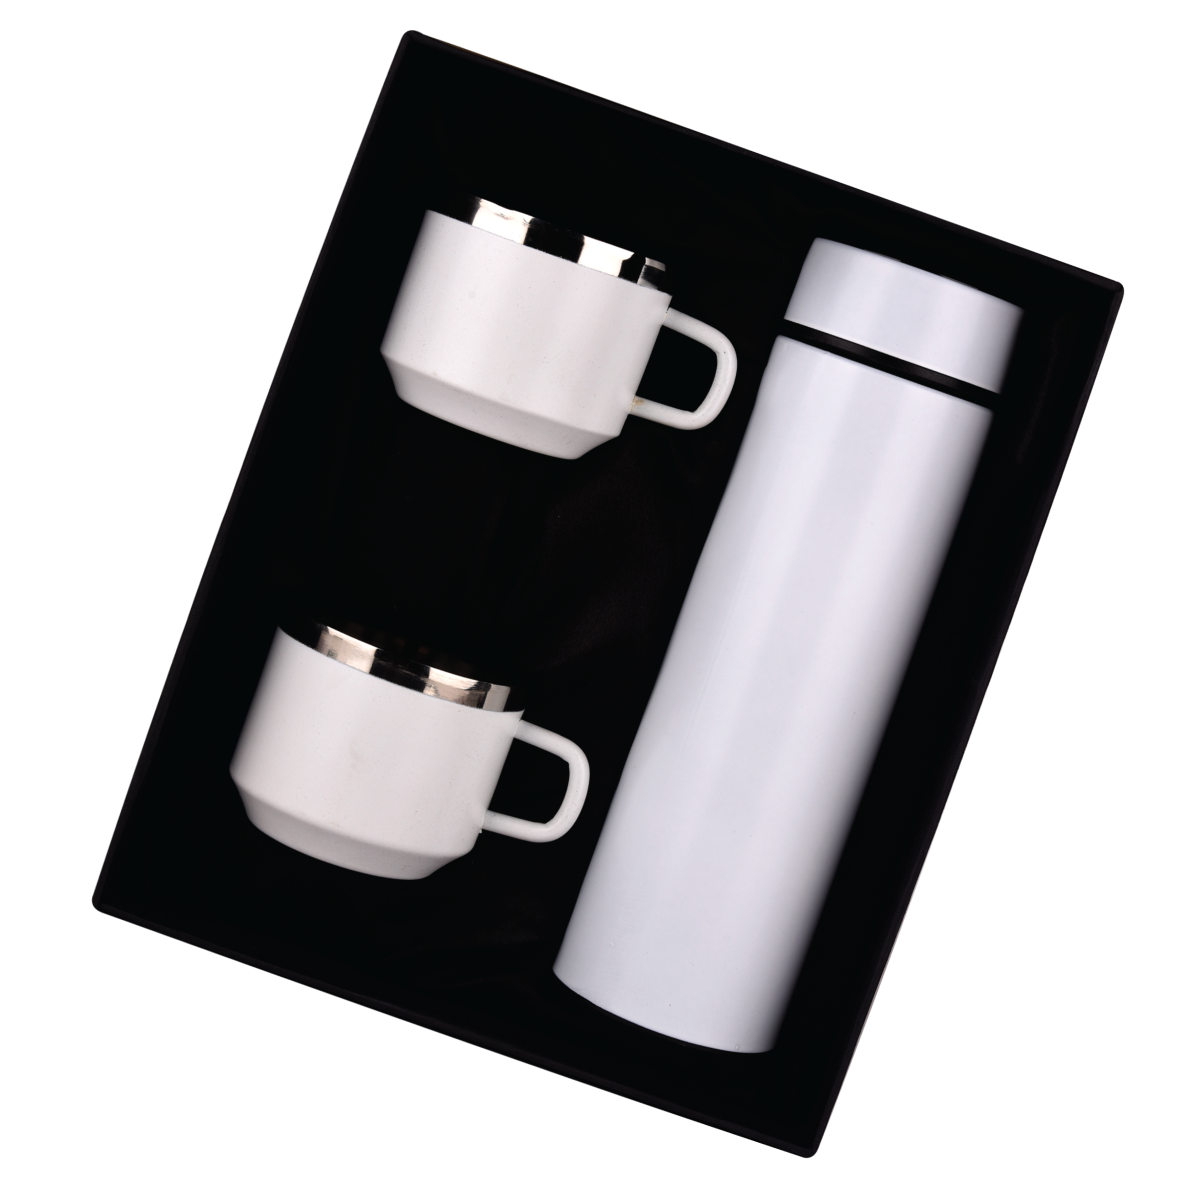 White Temperature Bottle With 2 Steel Cups Gift Set - For Employee Joining Kit, Corporate, Client or Dealer Gifting HK37335